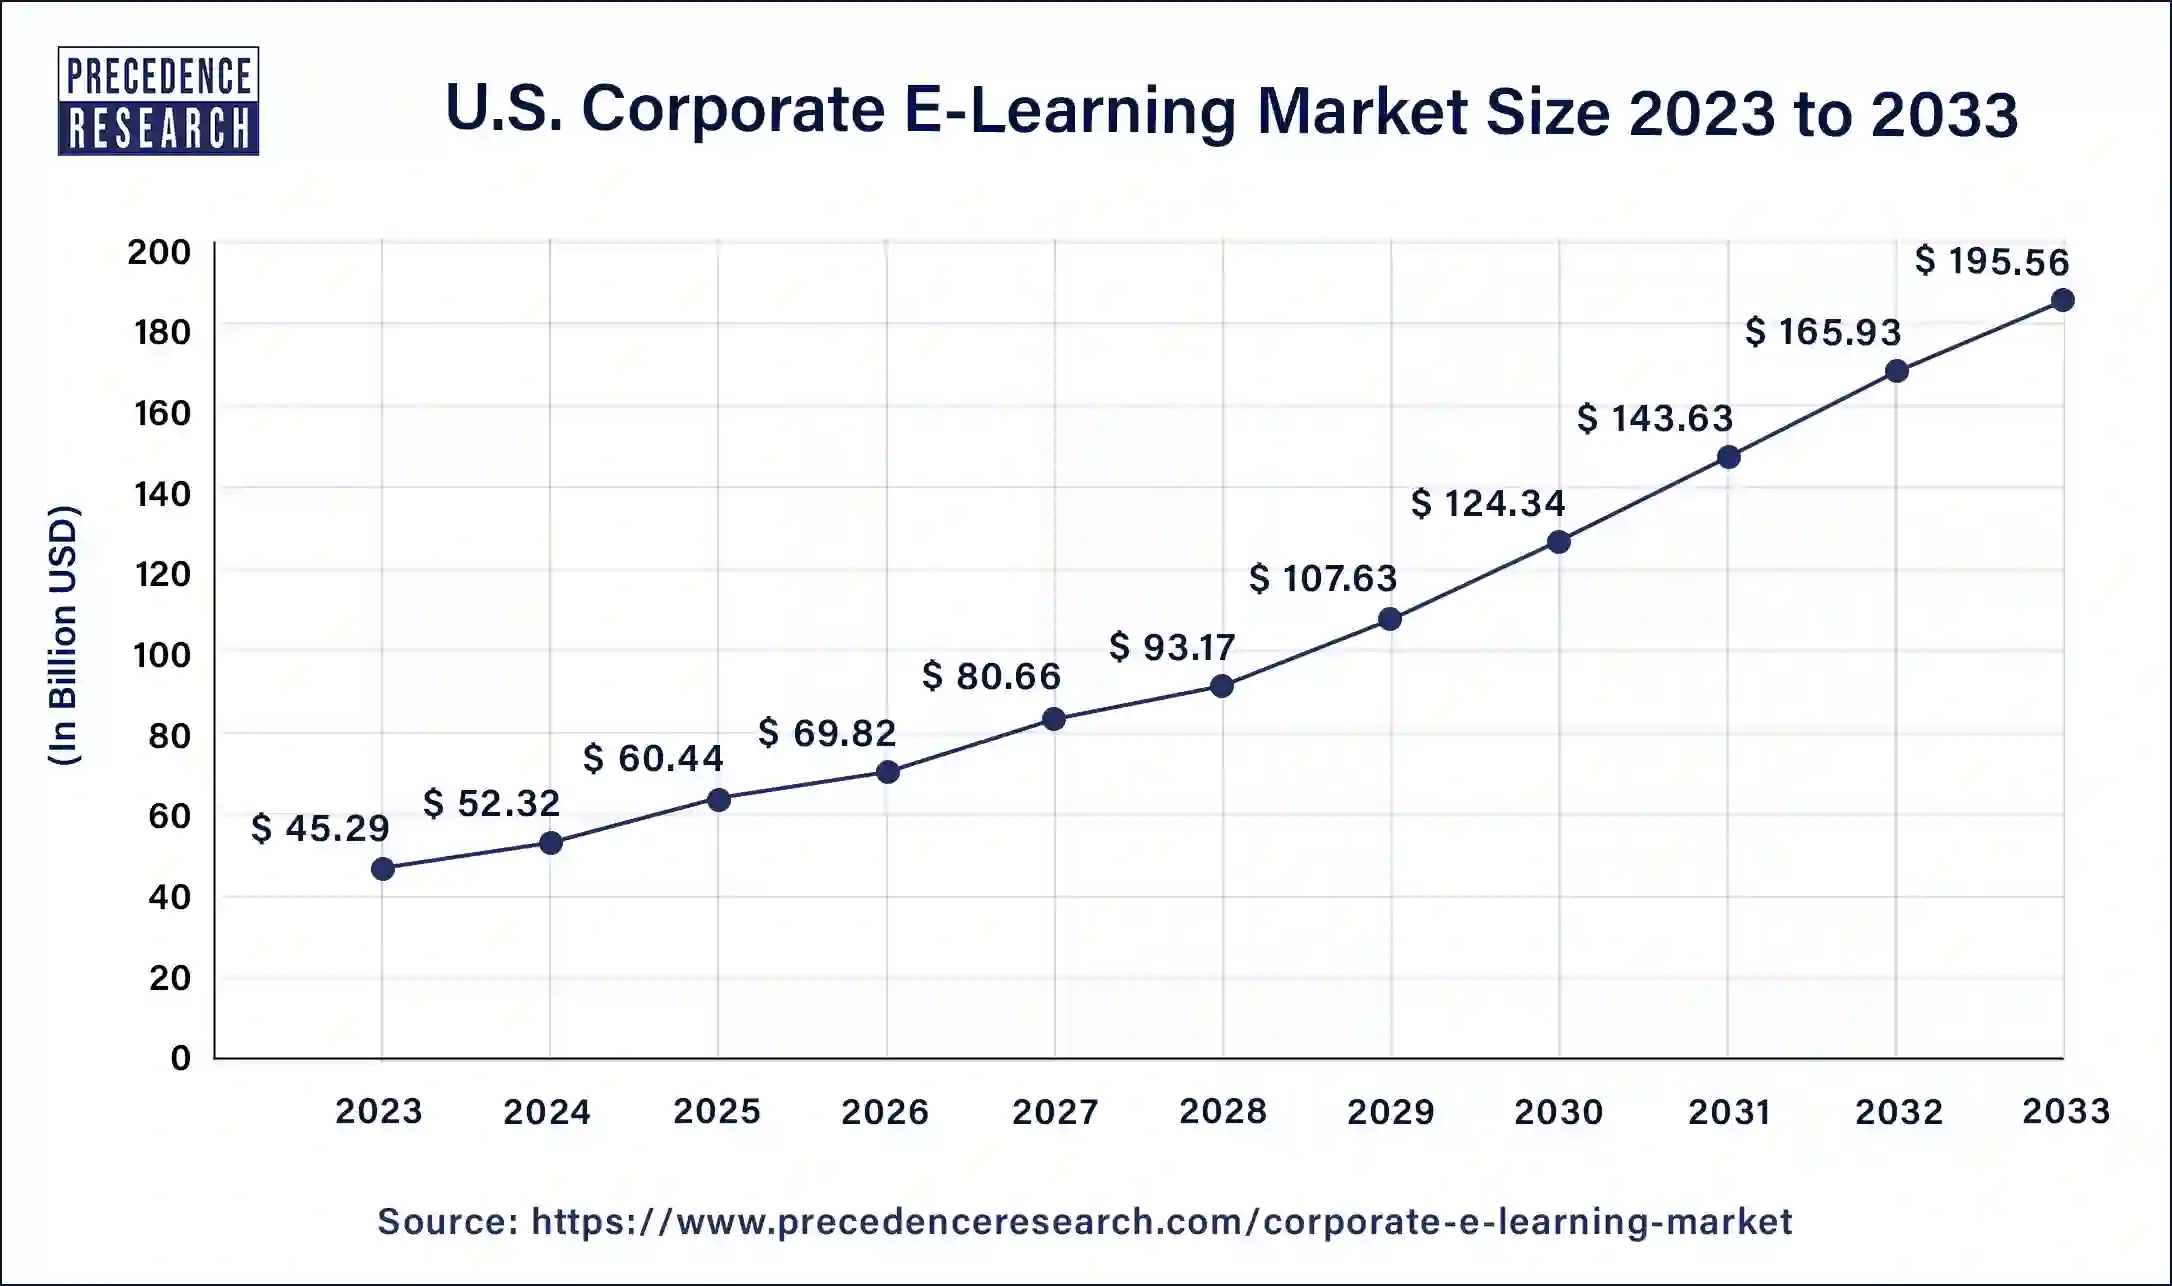 U.S. Corporate E-Learning Market Size 2024 to 2033 